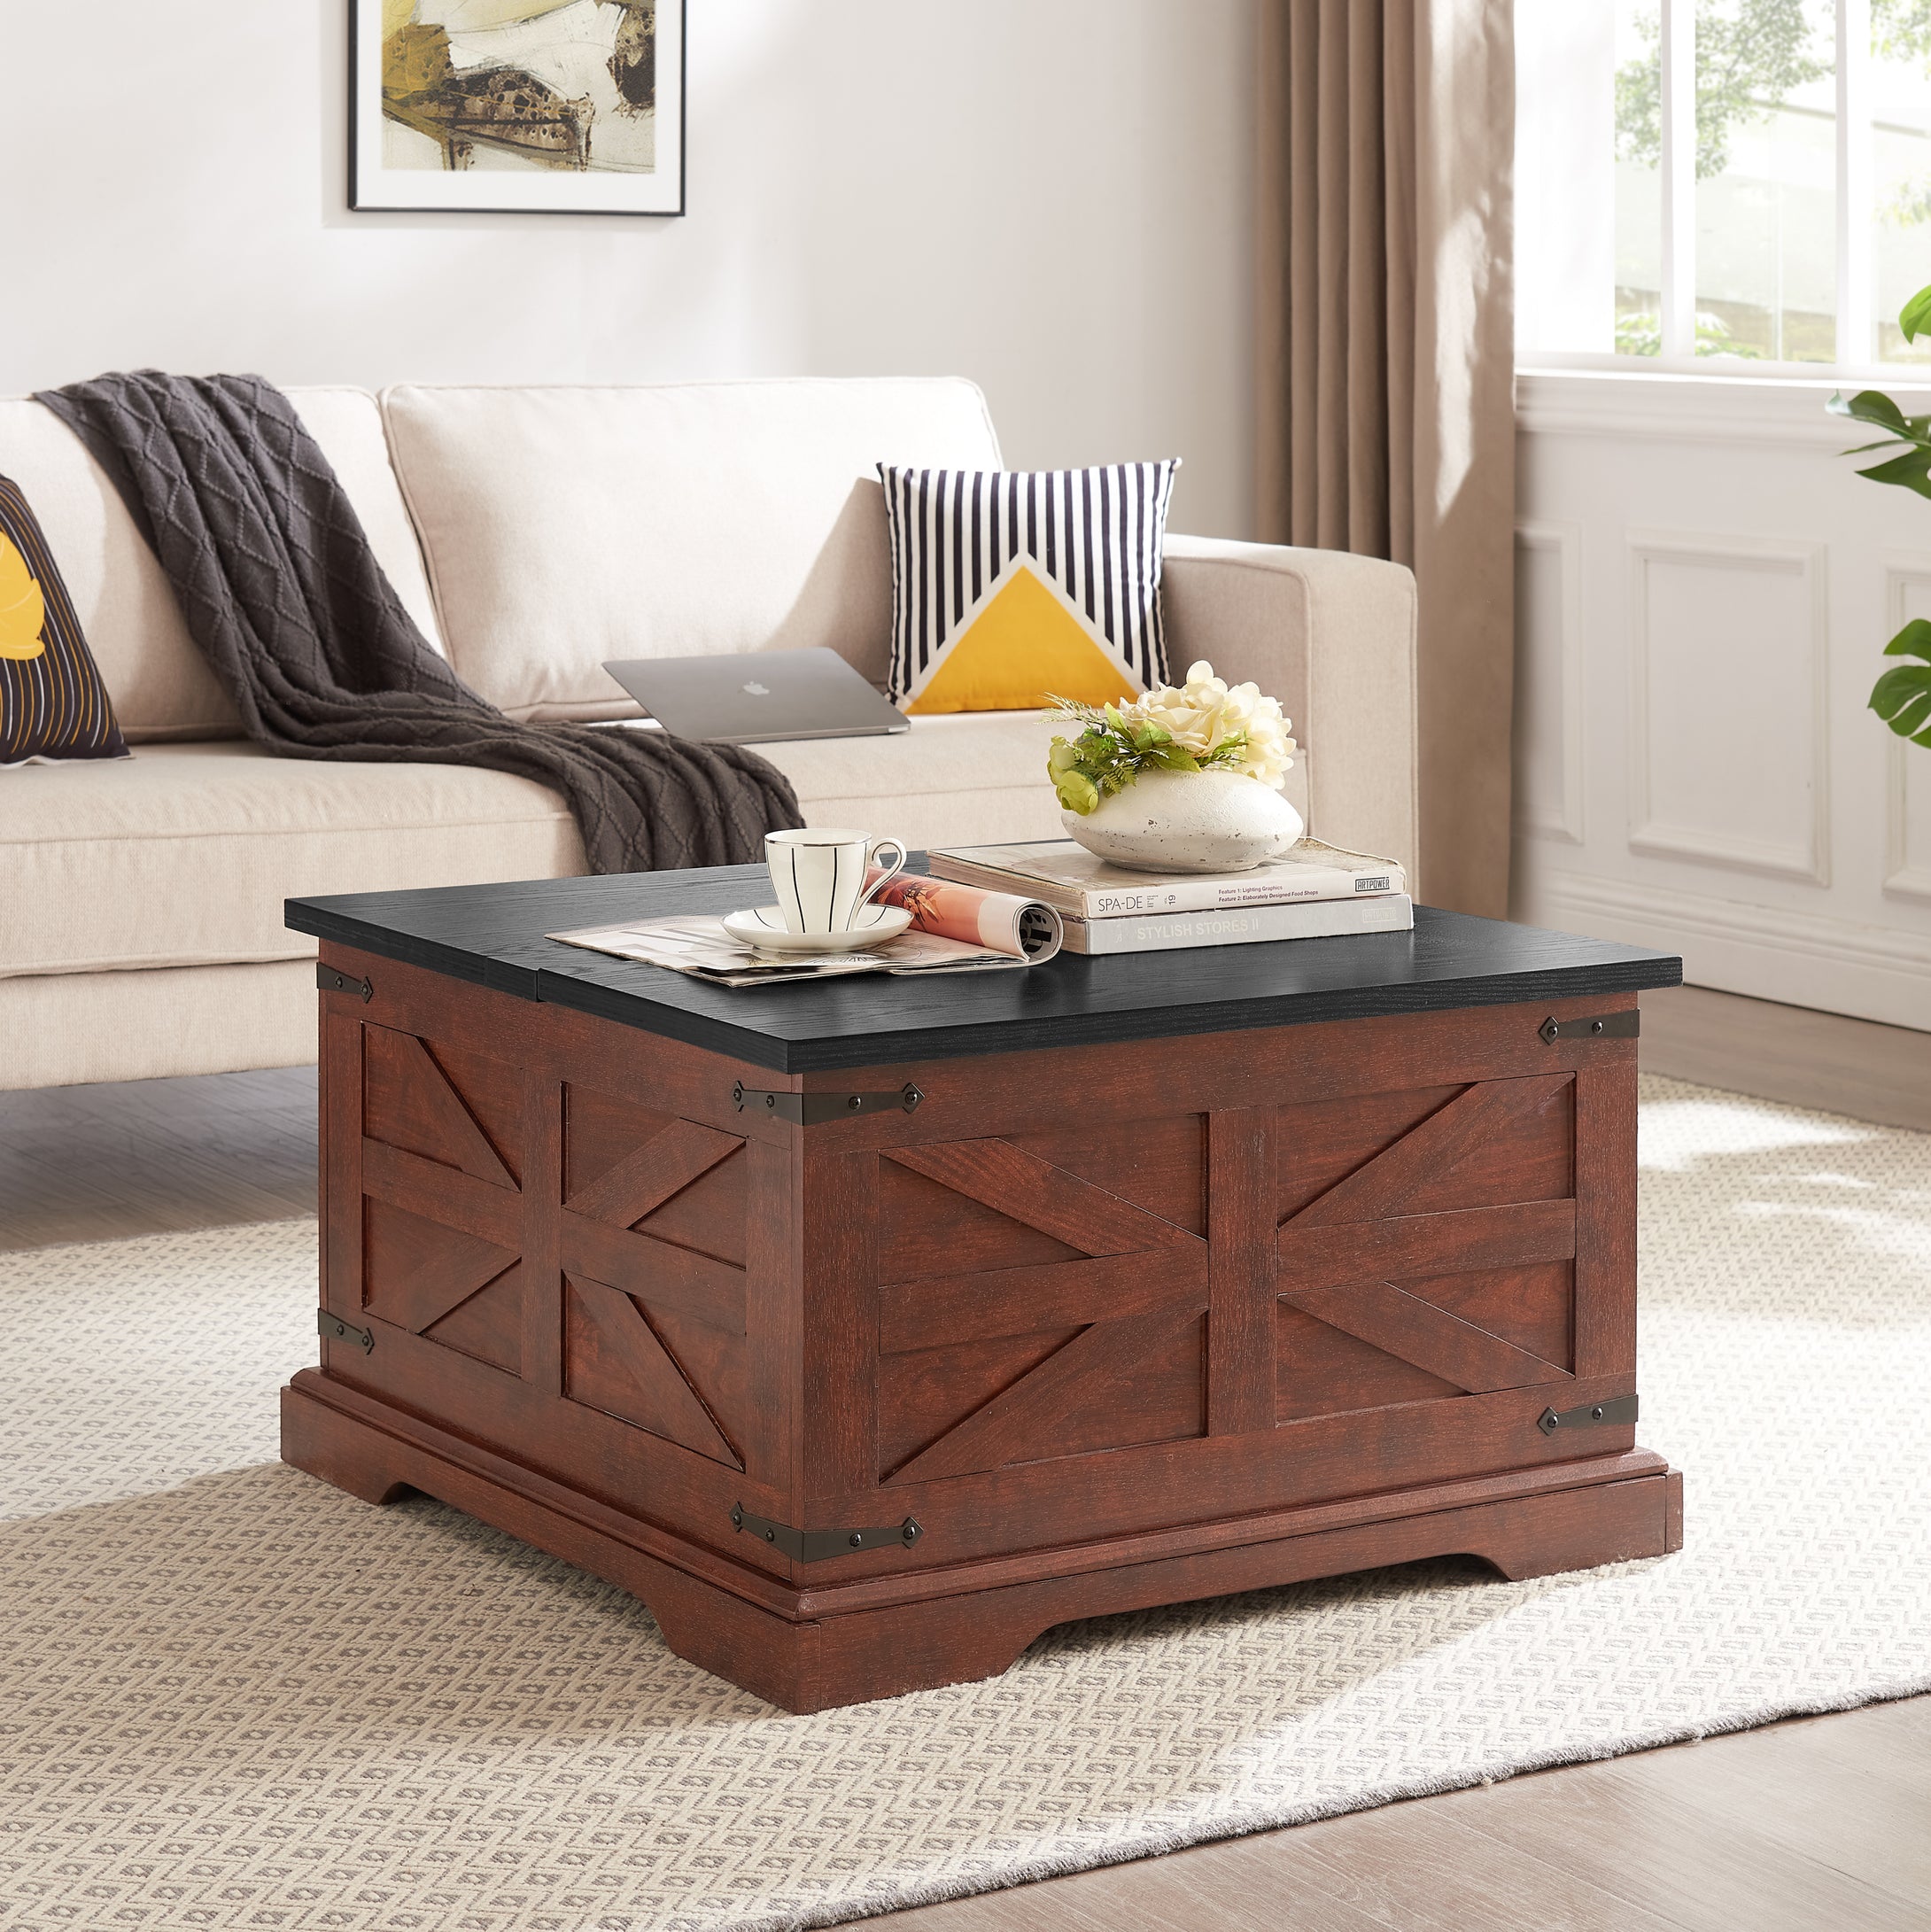 Square Wood Rustic Farmhouse Coffee Table with Large Hidden Storage Compartment and Hinged Lift Top (Oak Color)